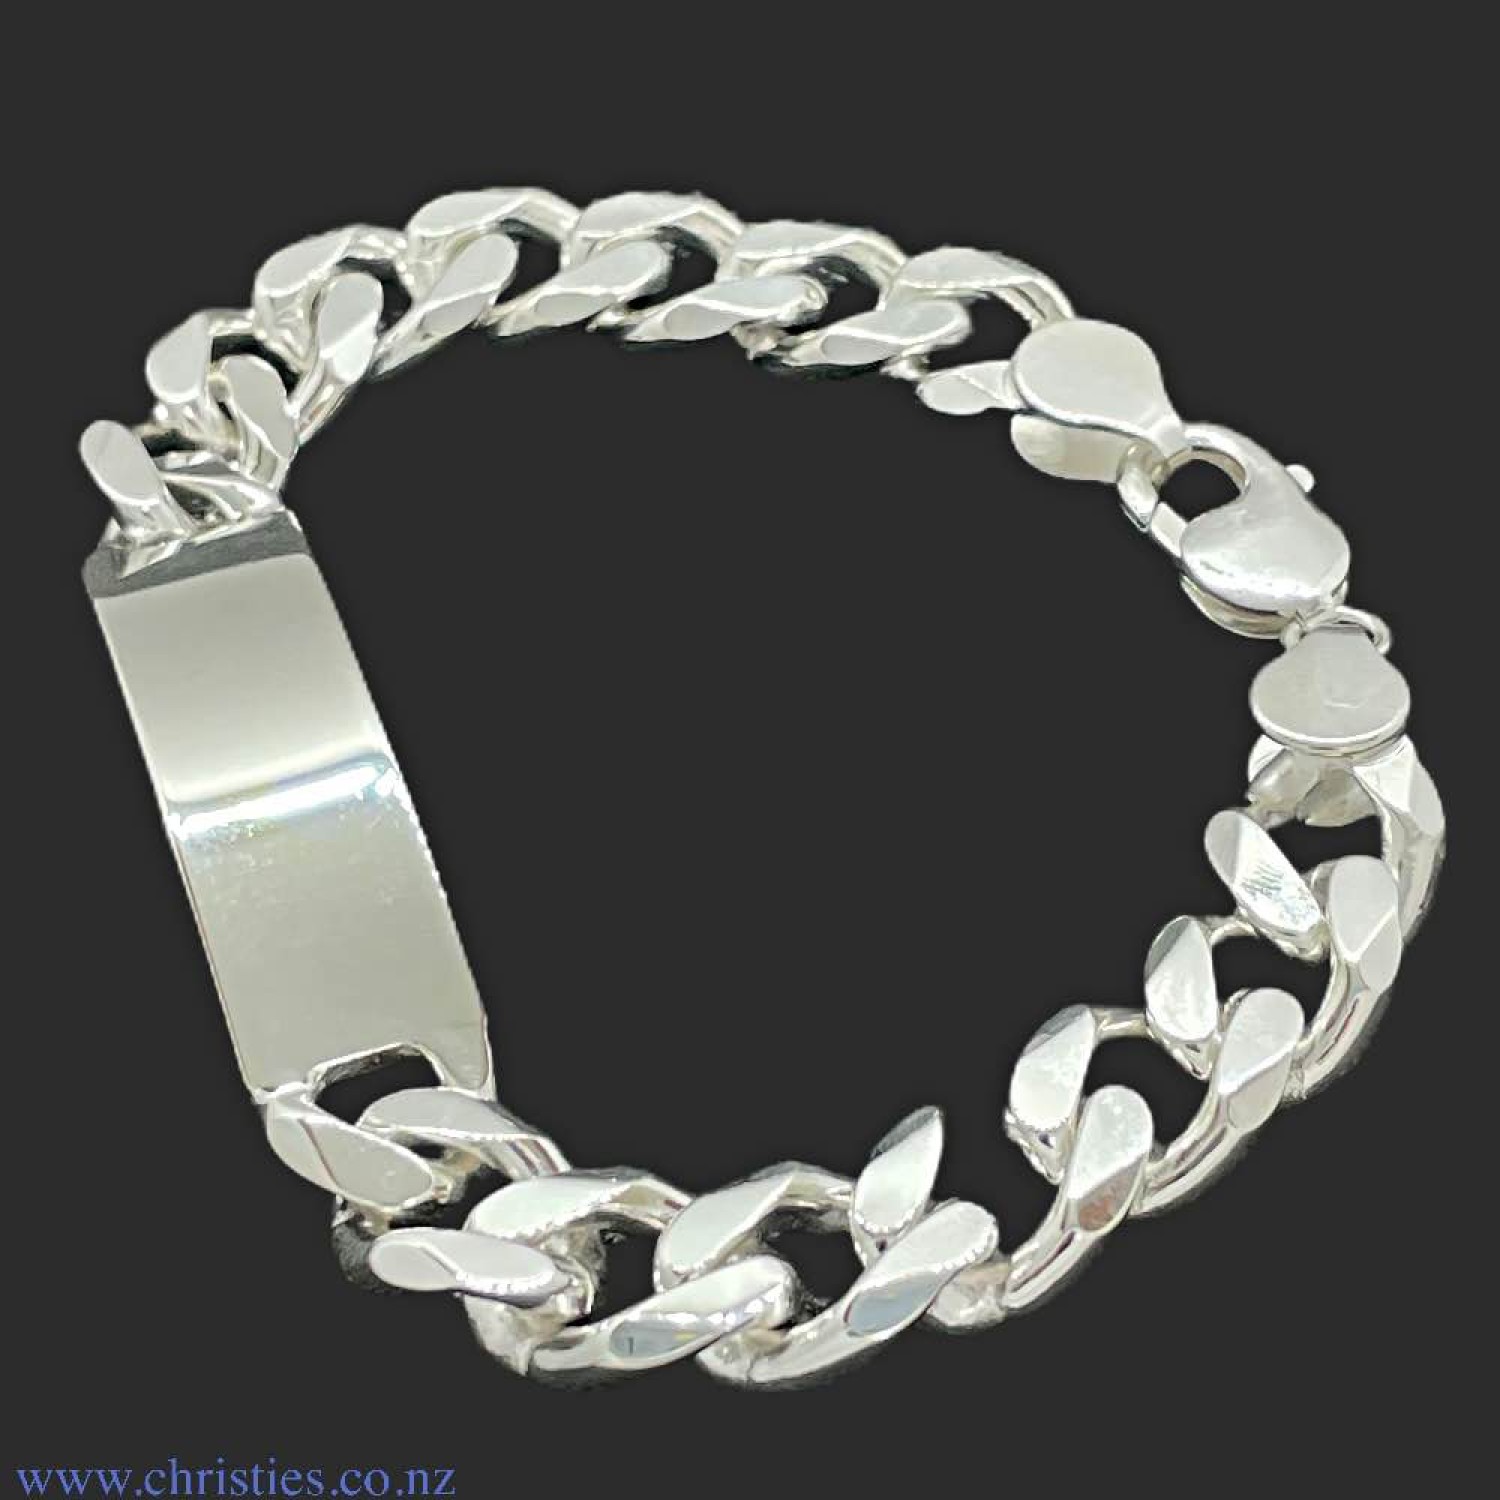 IDCD350H6C23 Sterling Silver ID Curb Link Heavy Bracelet. Heavy weight  Identification bracelet crafted in 925 sterling silver  Afterpay - Split your purchase into 4 instalments - Pay for your purchase over 4 instalments, due every two weeks. You’ll pay @